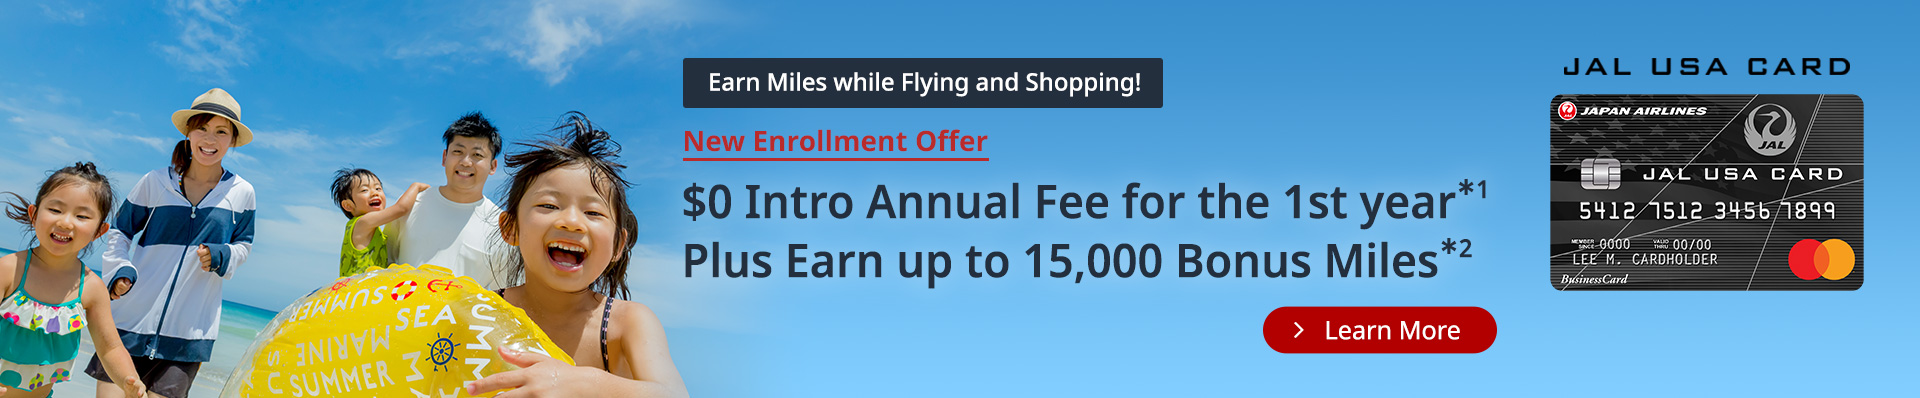 Earn Miles while Flying and Shopping! New Enrollment Offer. $0 Intro Annual Fee for the 1st year*1. Plus Earn up to 15,000 Bonus Miles*2